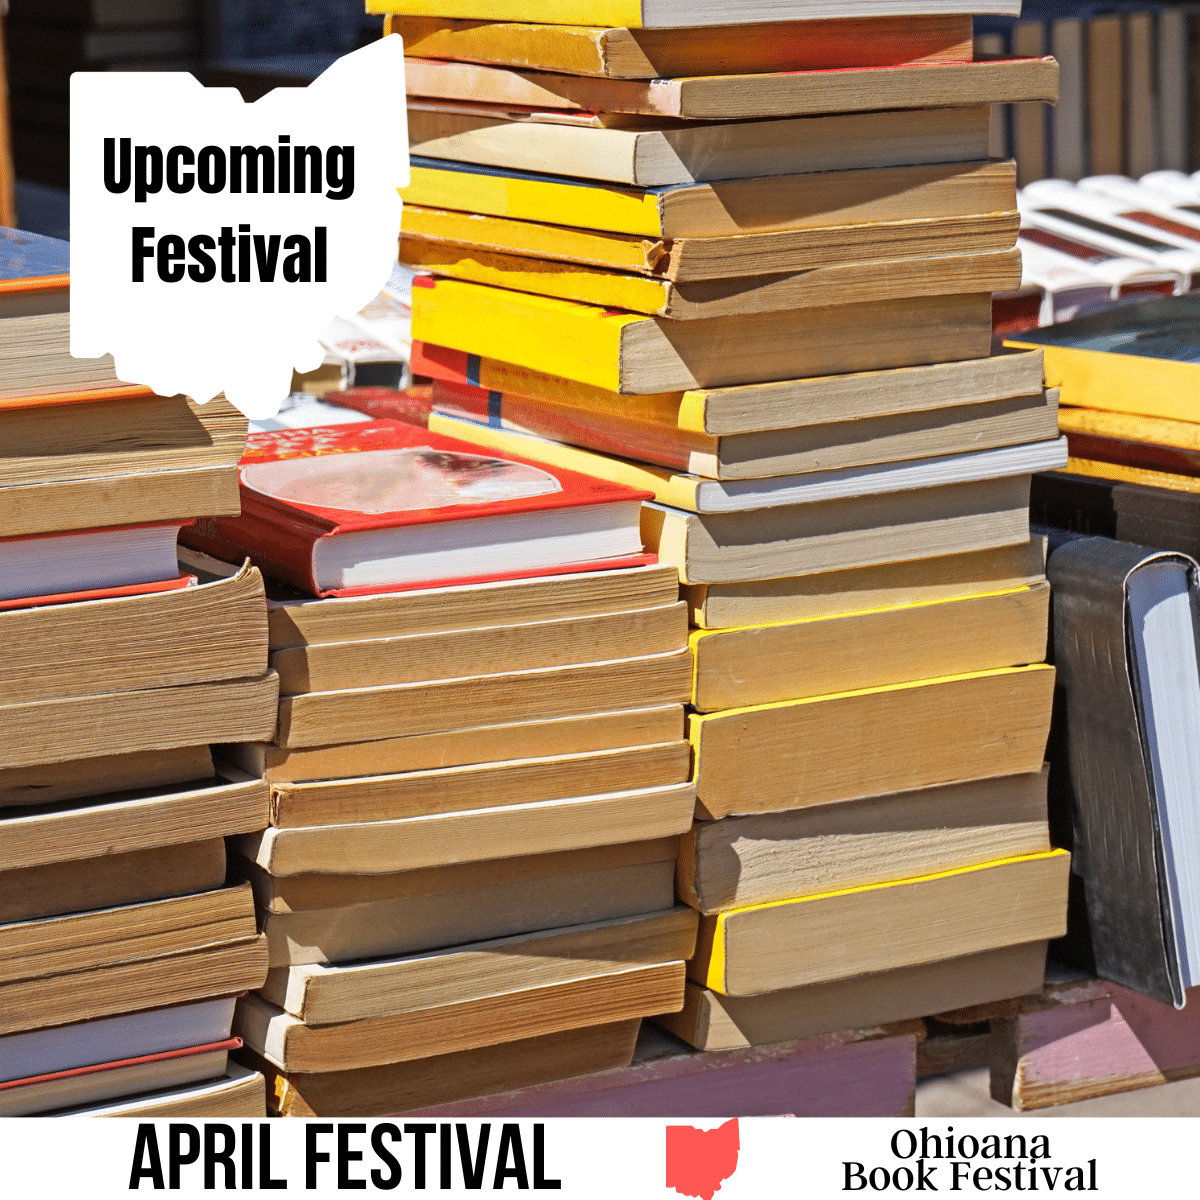 A square image of a photo of several stacks of books. A white image of Ohio has text Upcoming Festival. A white strip across the bottom has text April Festival Ohioana Book Festival